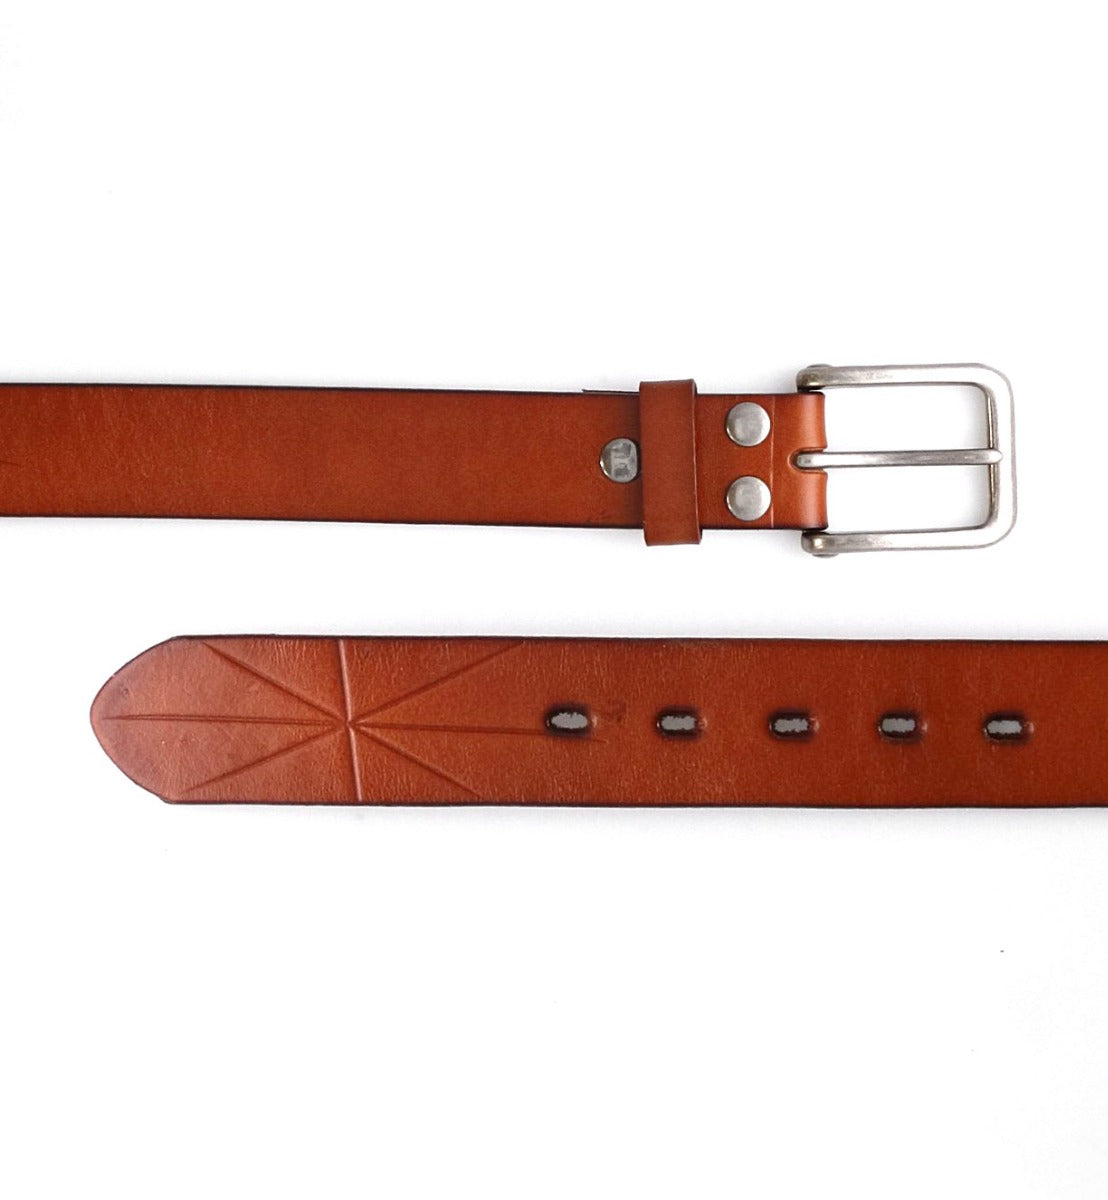 A Westham leather belt by Bed Stu on a white background.